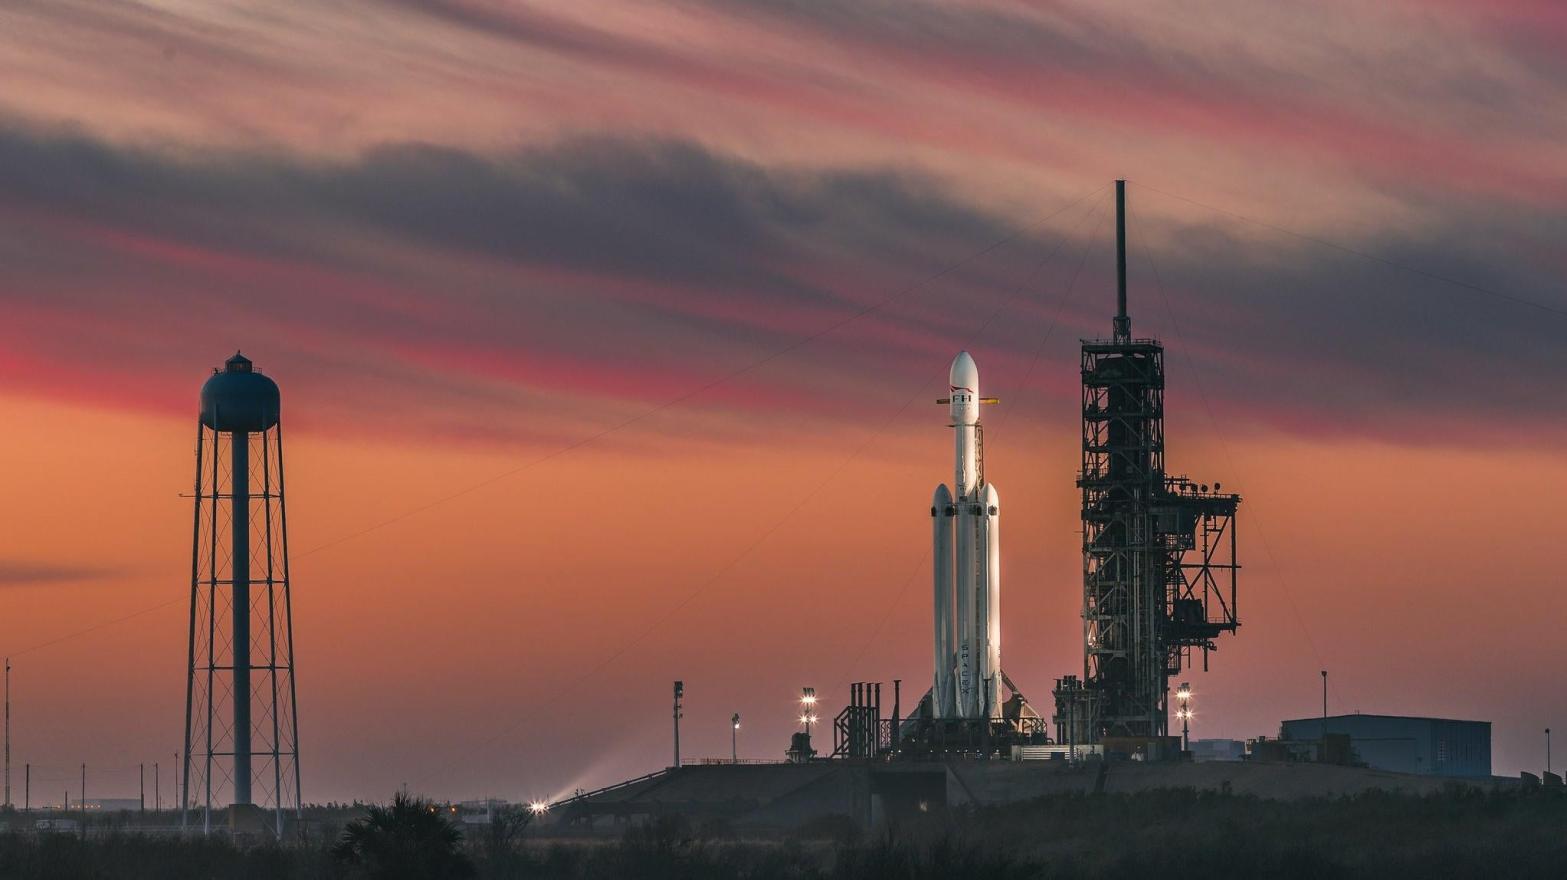 Falcon Heavy prior to its inaugural launch in 2018. (Photo: SpaceX)